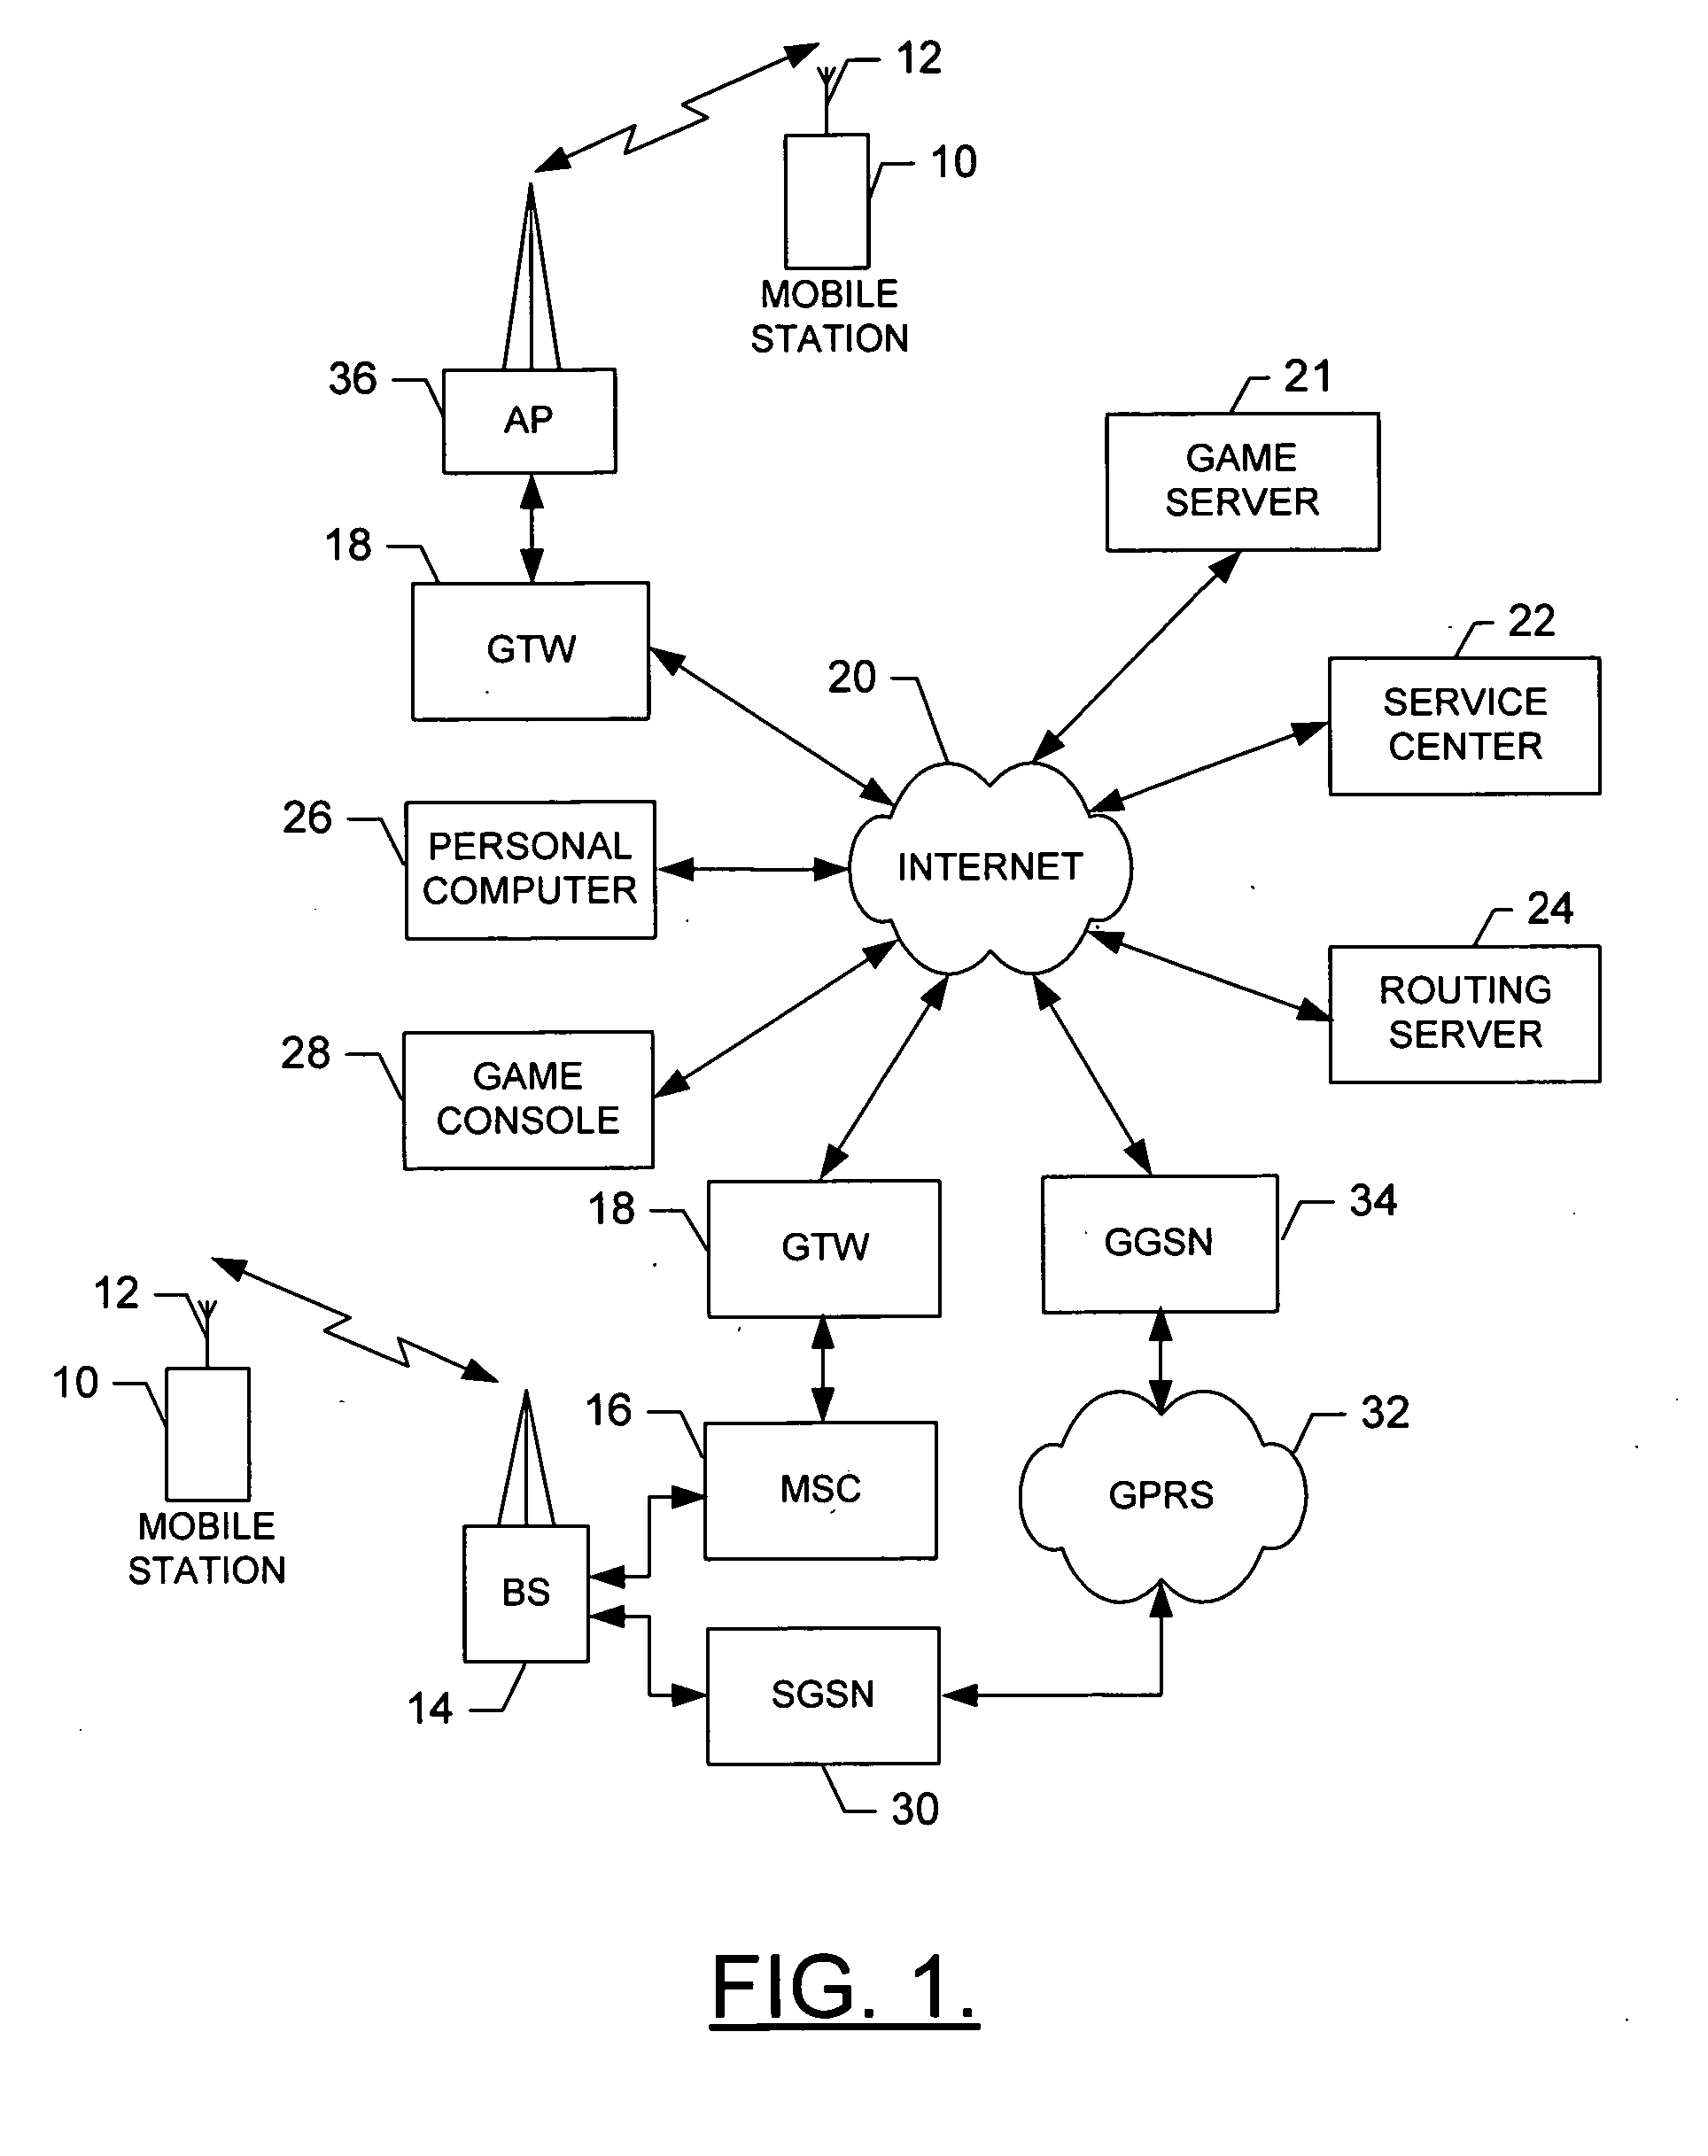 System and method for providing interoperability of independently-operable electronic games